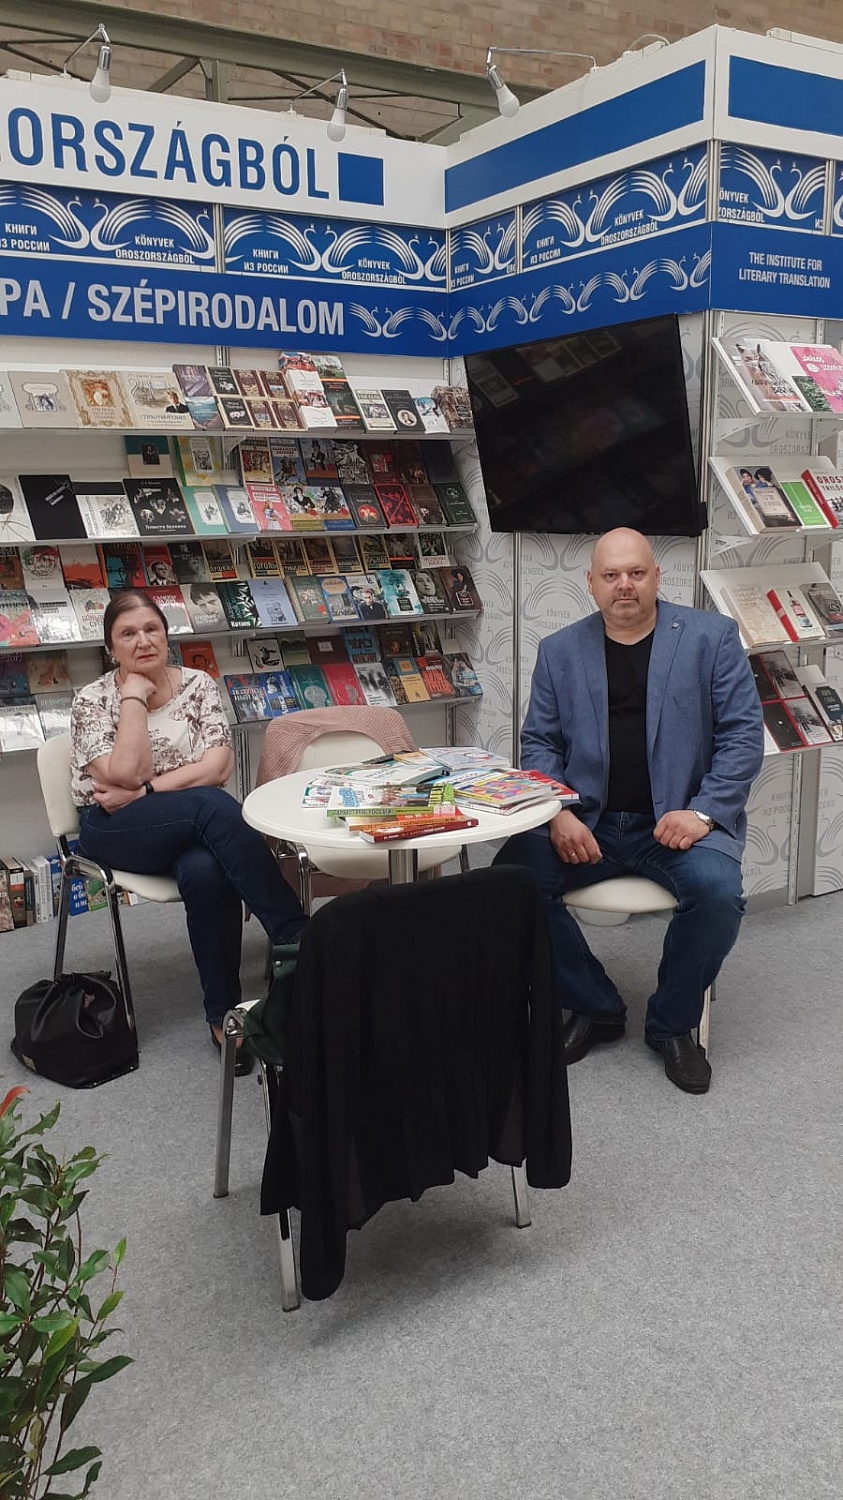 THE PUBLISHING HOUSE RUSSKY YAZYK. KURSY TOOK PART IN THE 28TH BOOK FAIR IN BUDAPEST